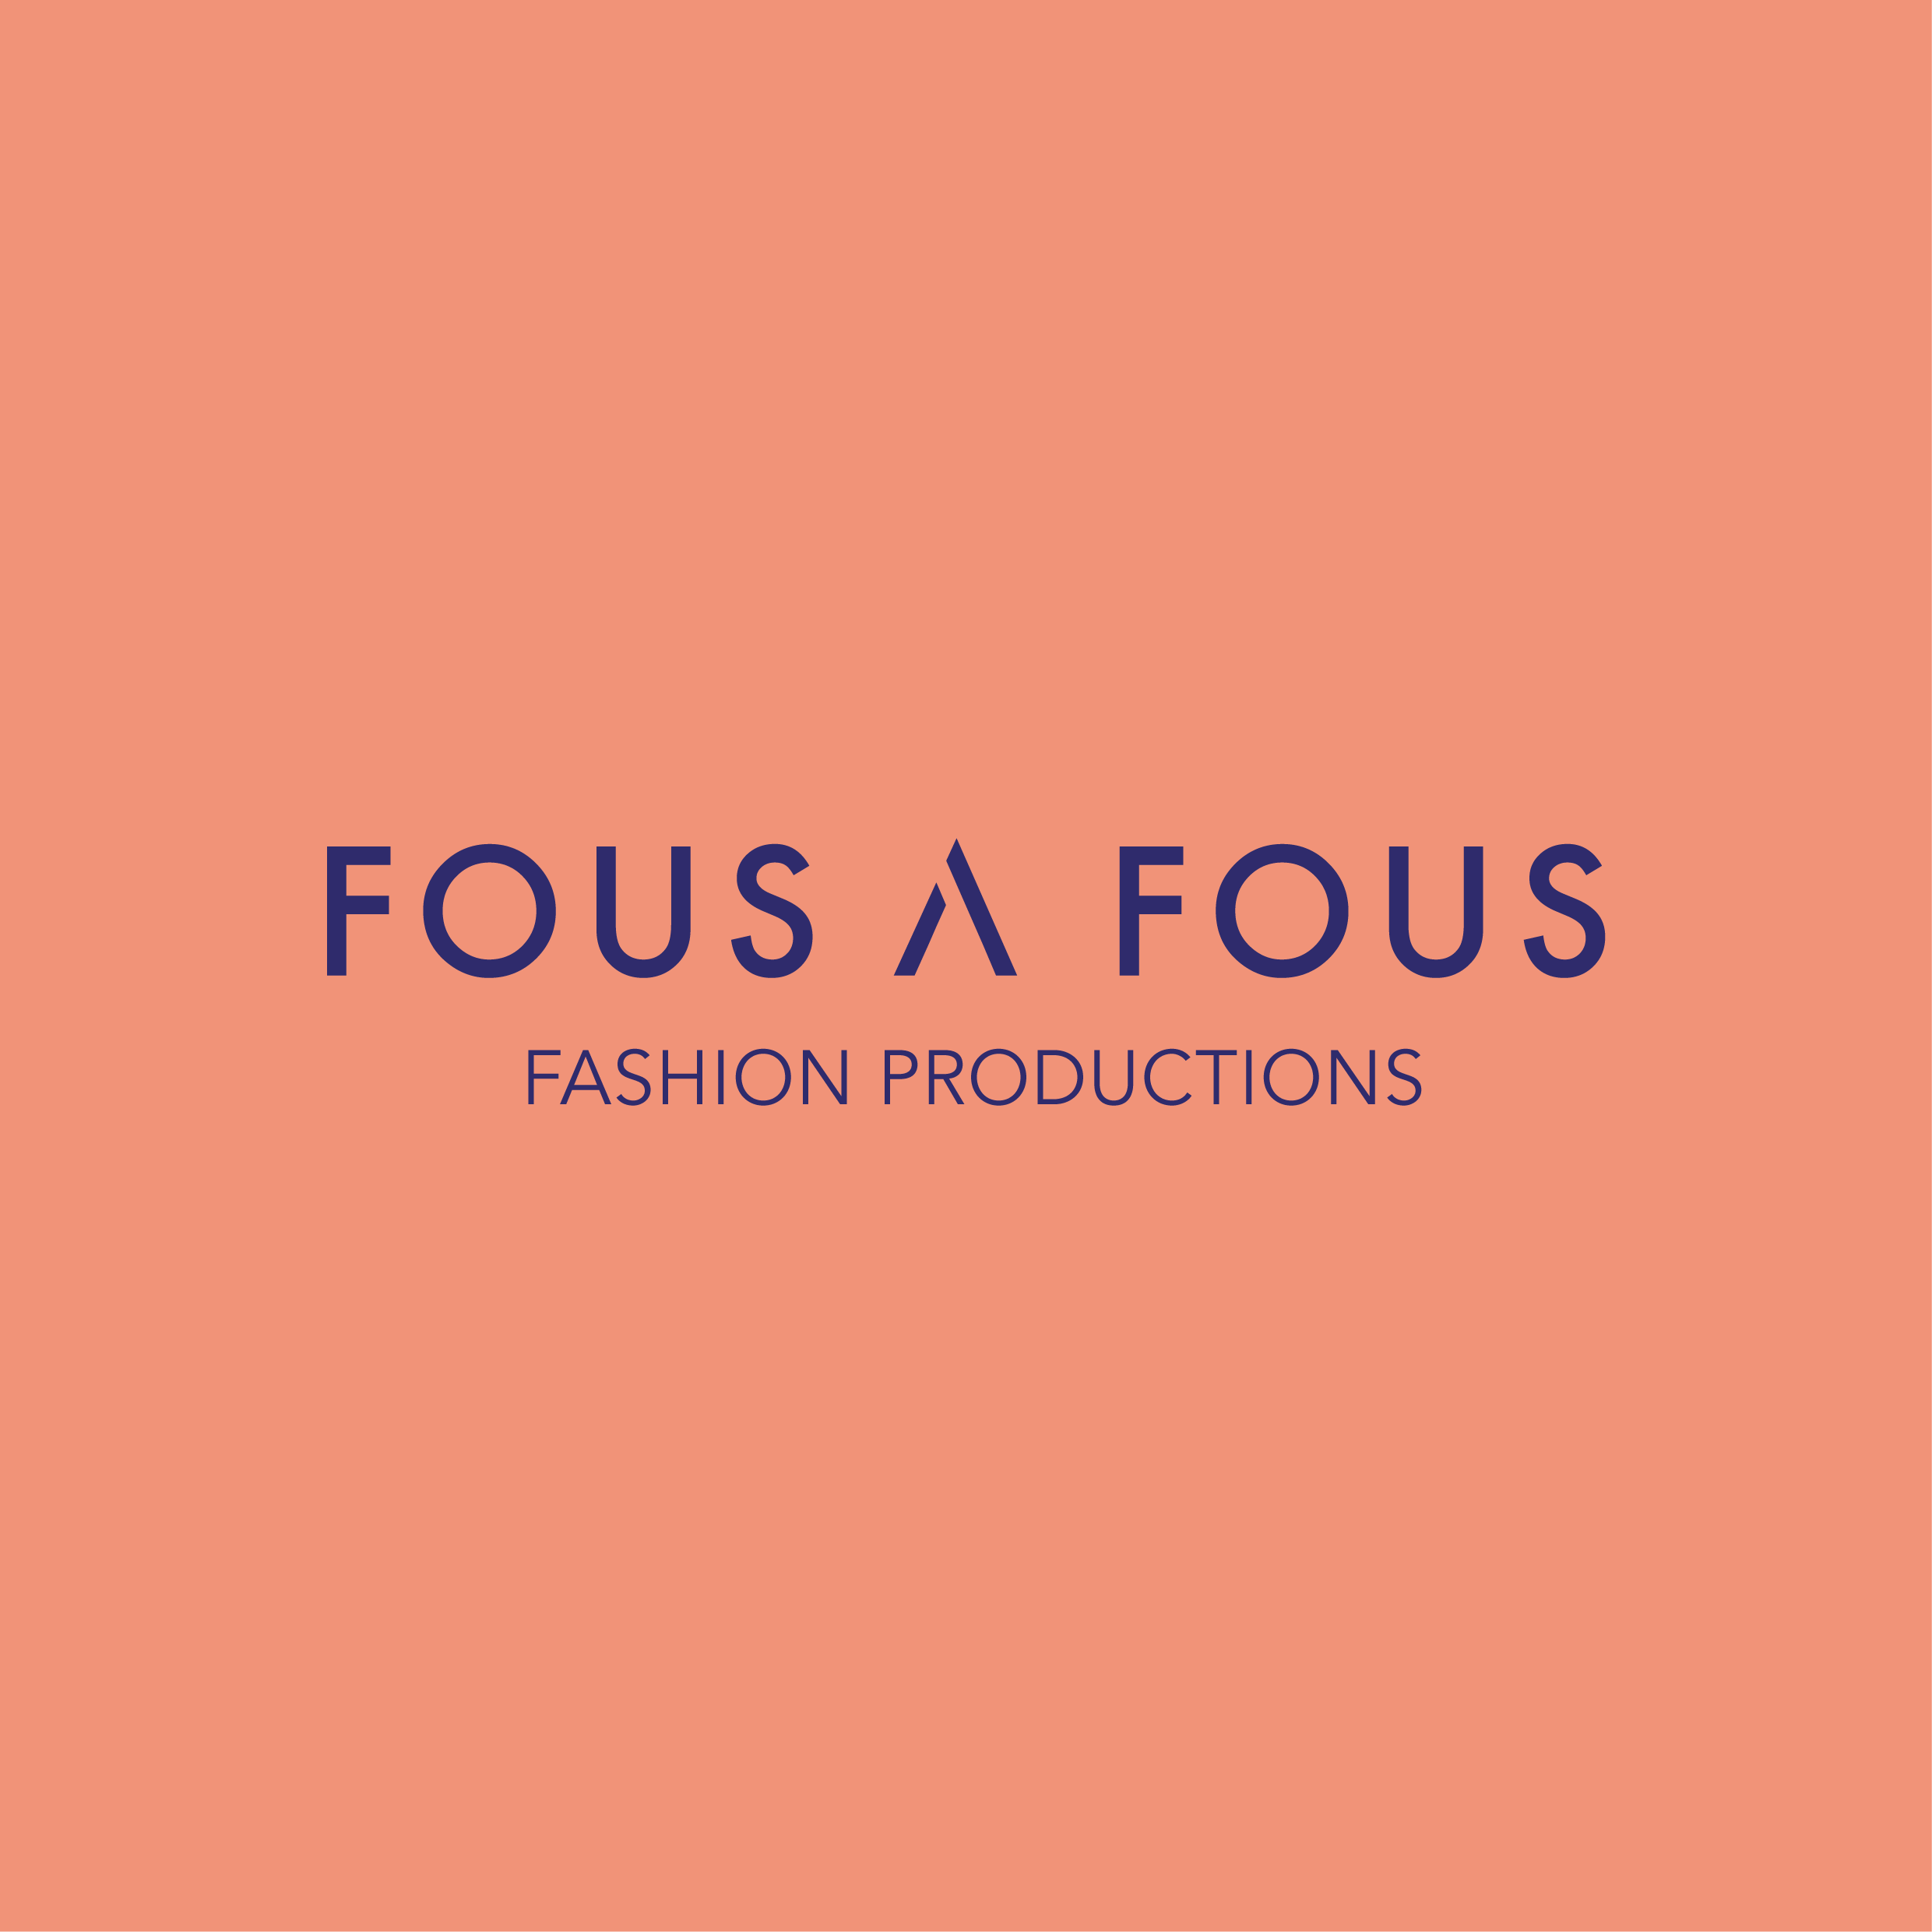 Organisations logo image for Fous A Fous Fashion Apparel Productions